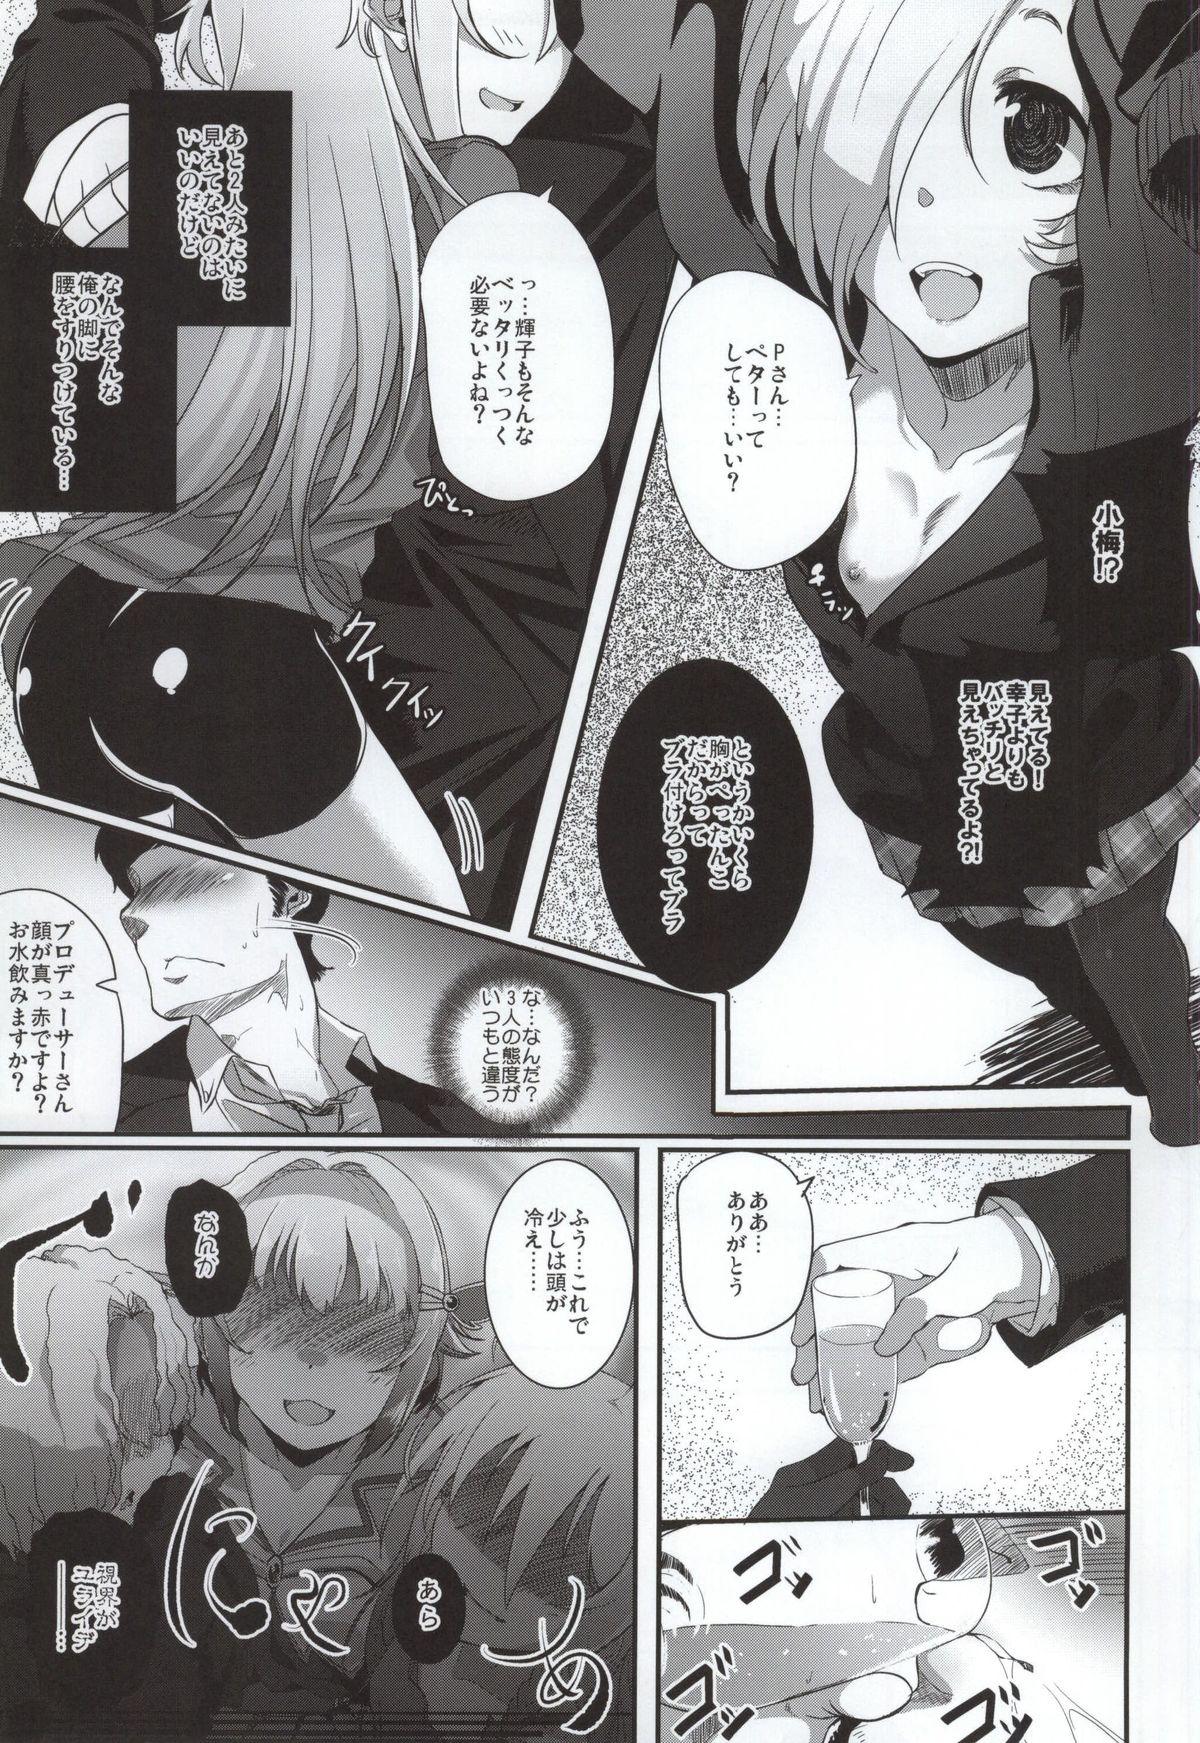 Hardcore Rough Sex Shall we indulge in Lust, producer? - The idolmaster Gay 3some - Page 6